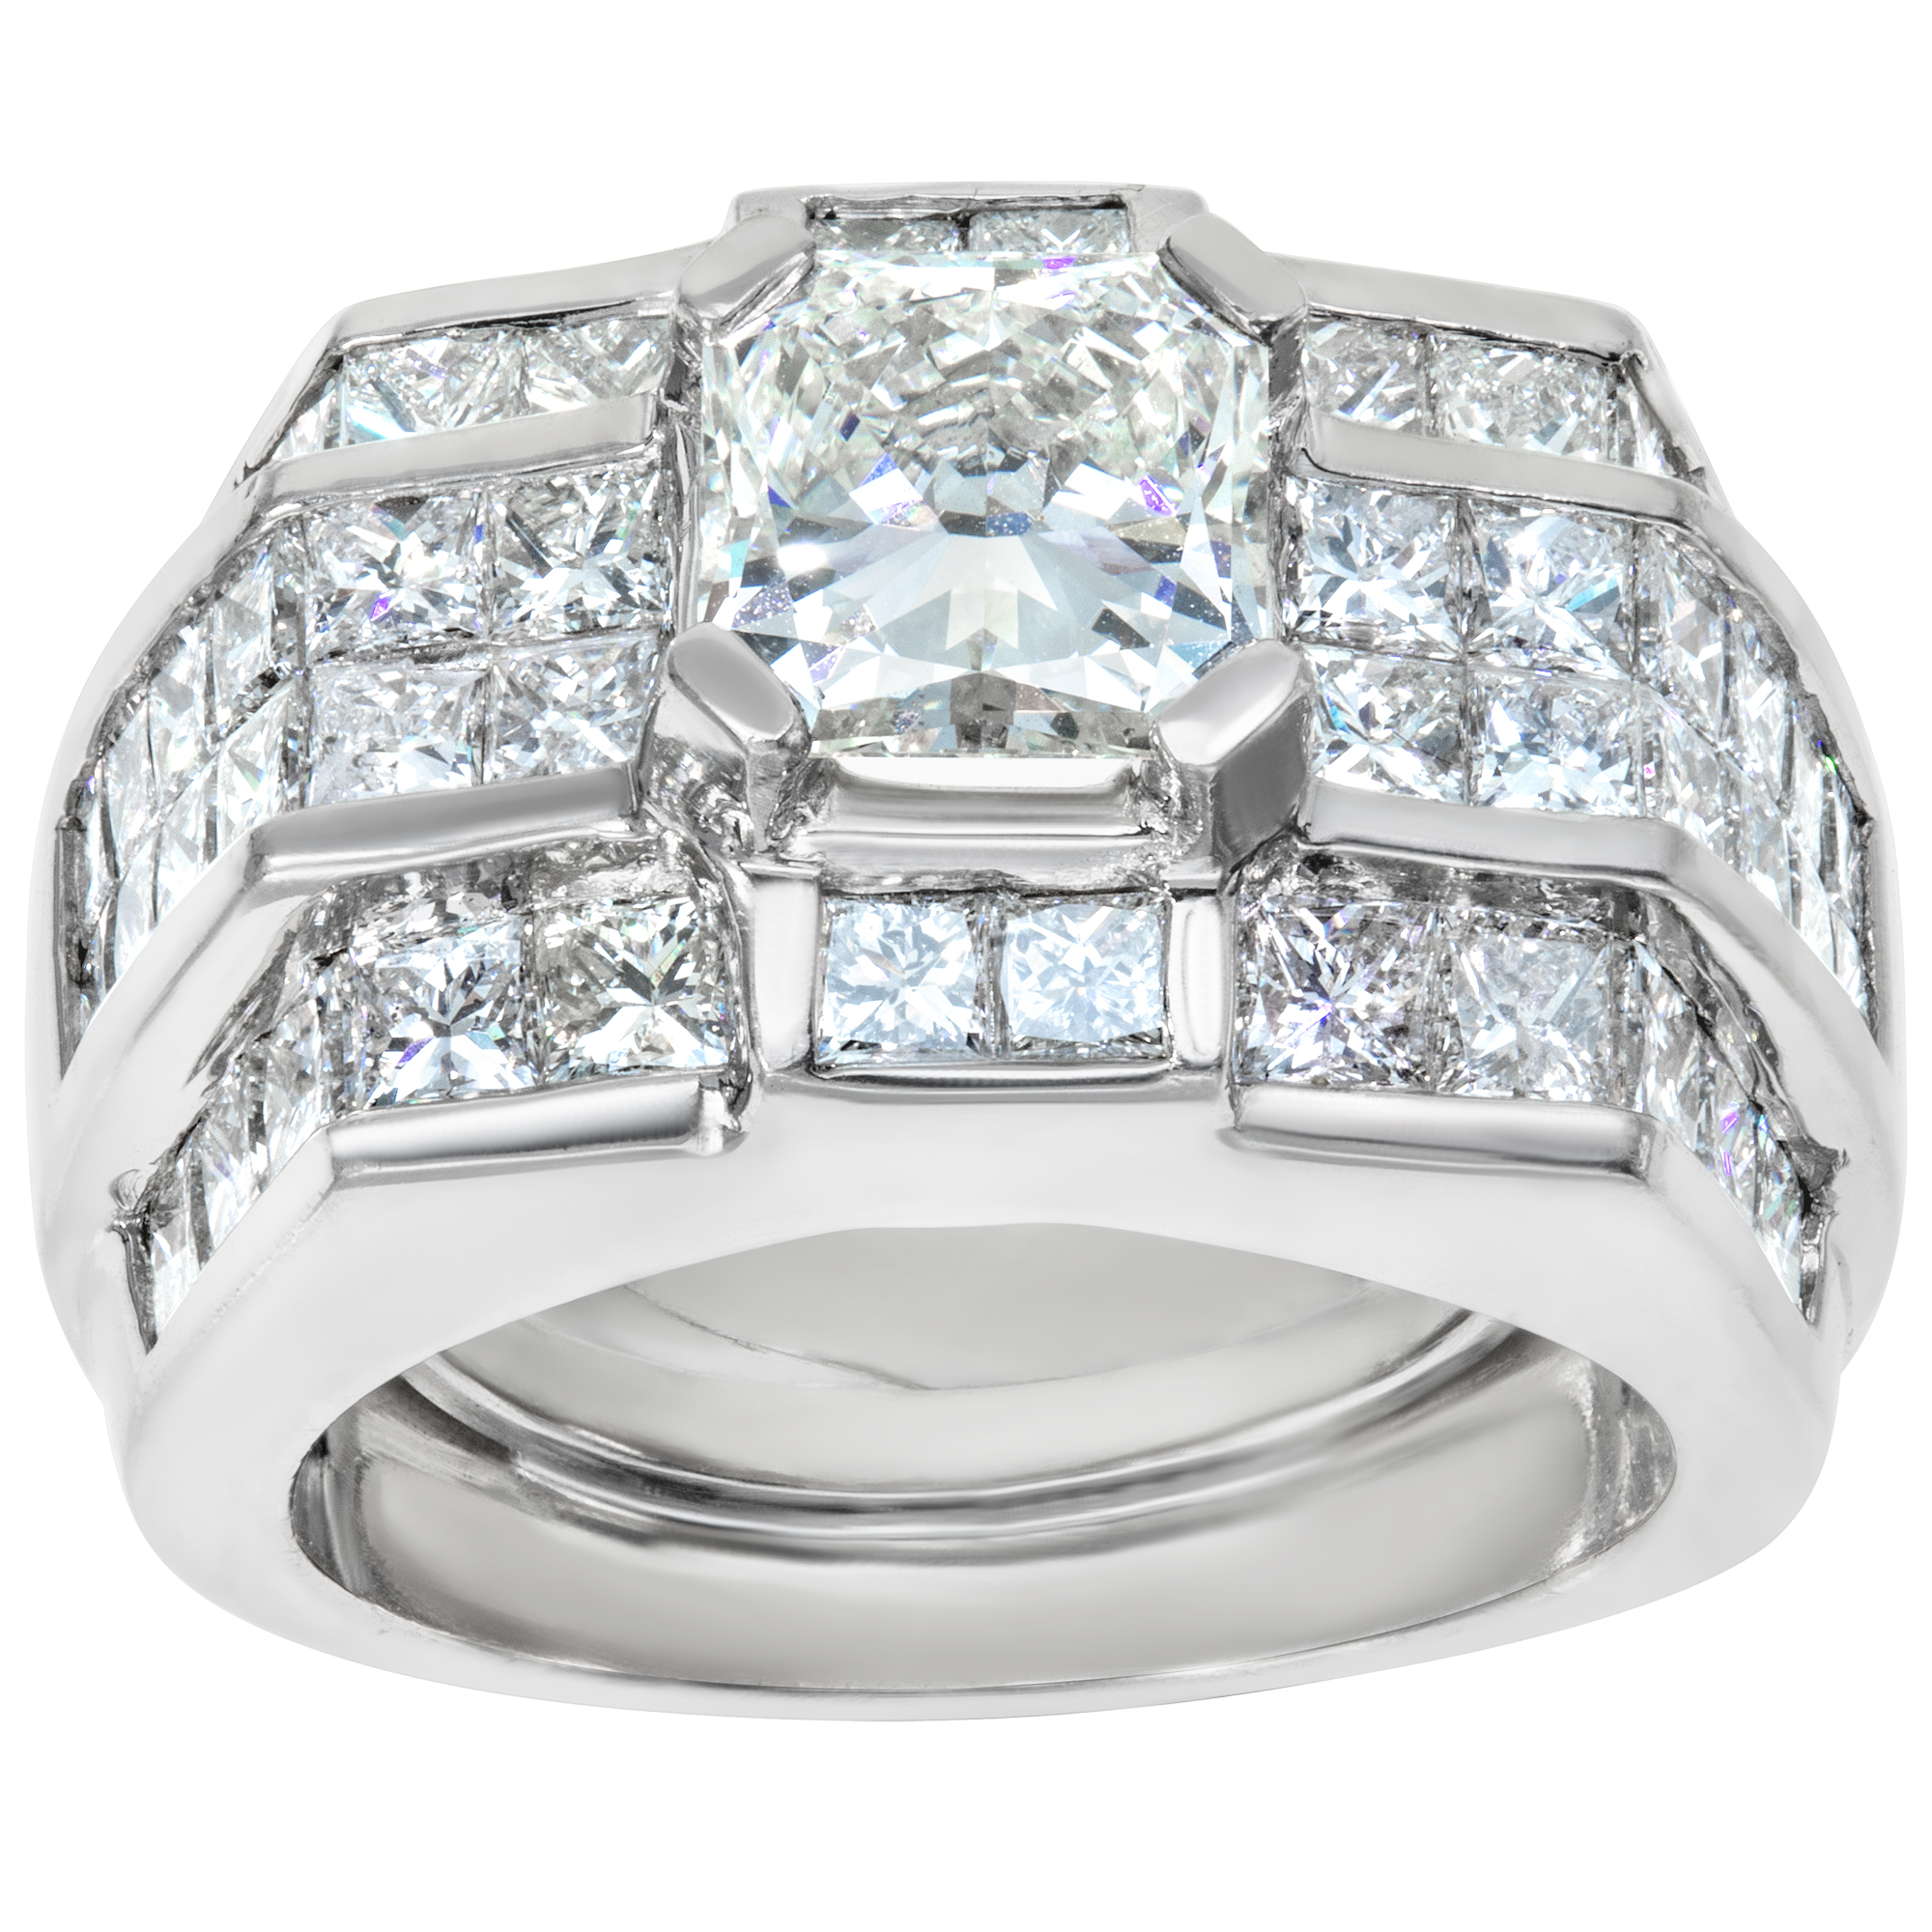 Gia Certified 2.22 Carats Round  Brilliant Diamond,  J Color Vs2 Clarity Set In Heavy Platinum Ring With 4 Rows Invisible Set  Princess Cut Diamonds, Total  Approx. Weight: 4.60 Carats